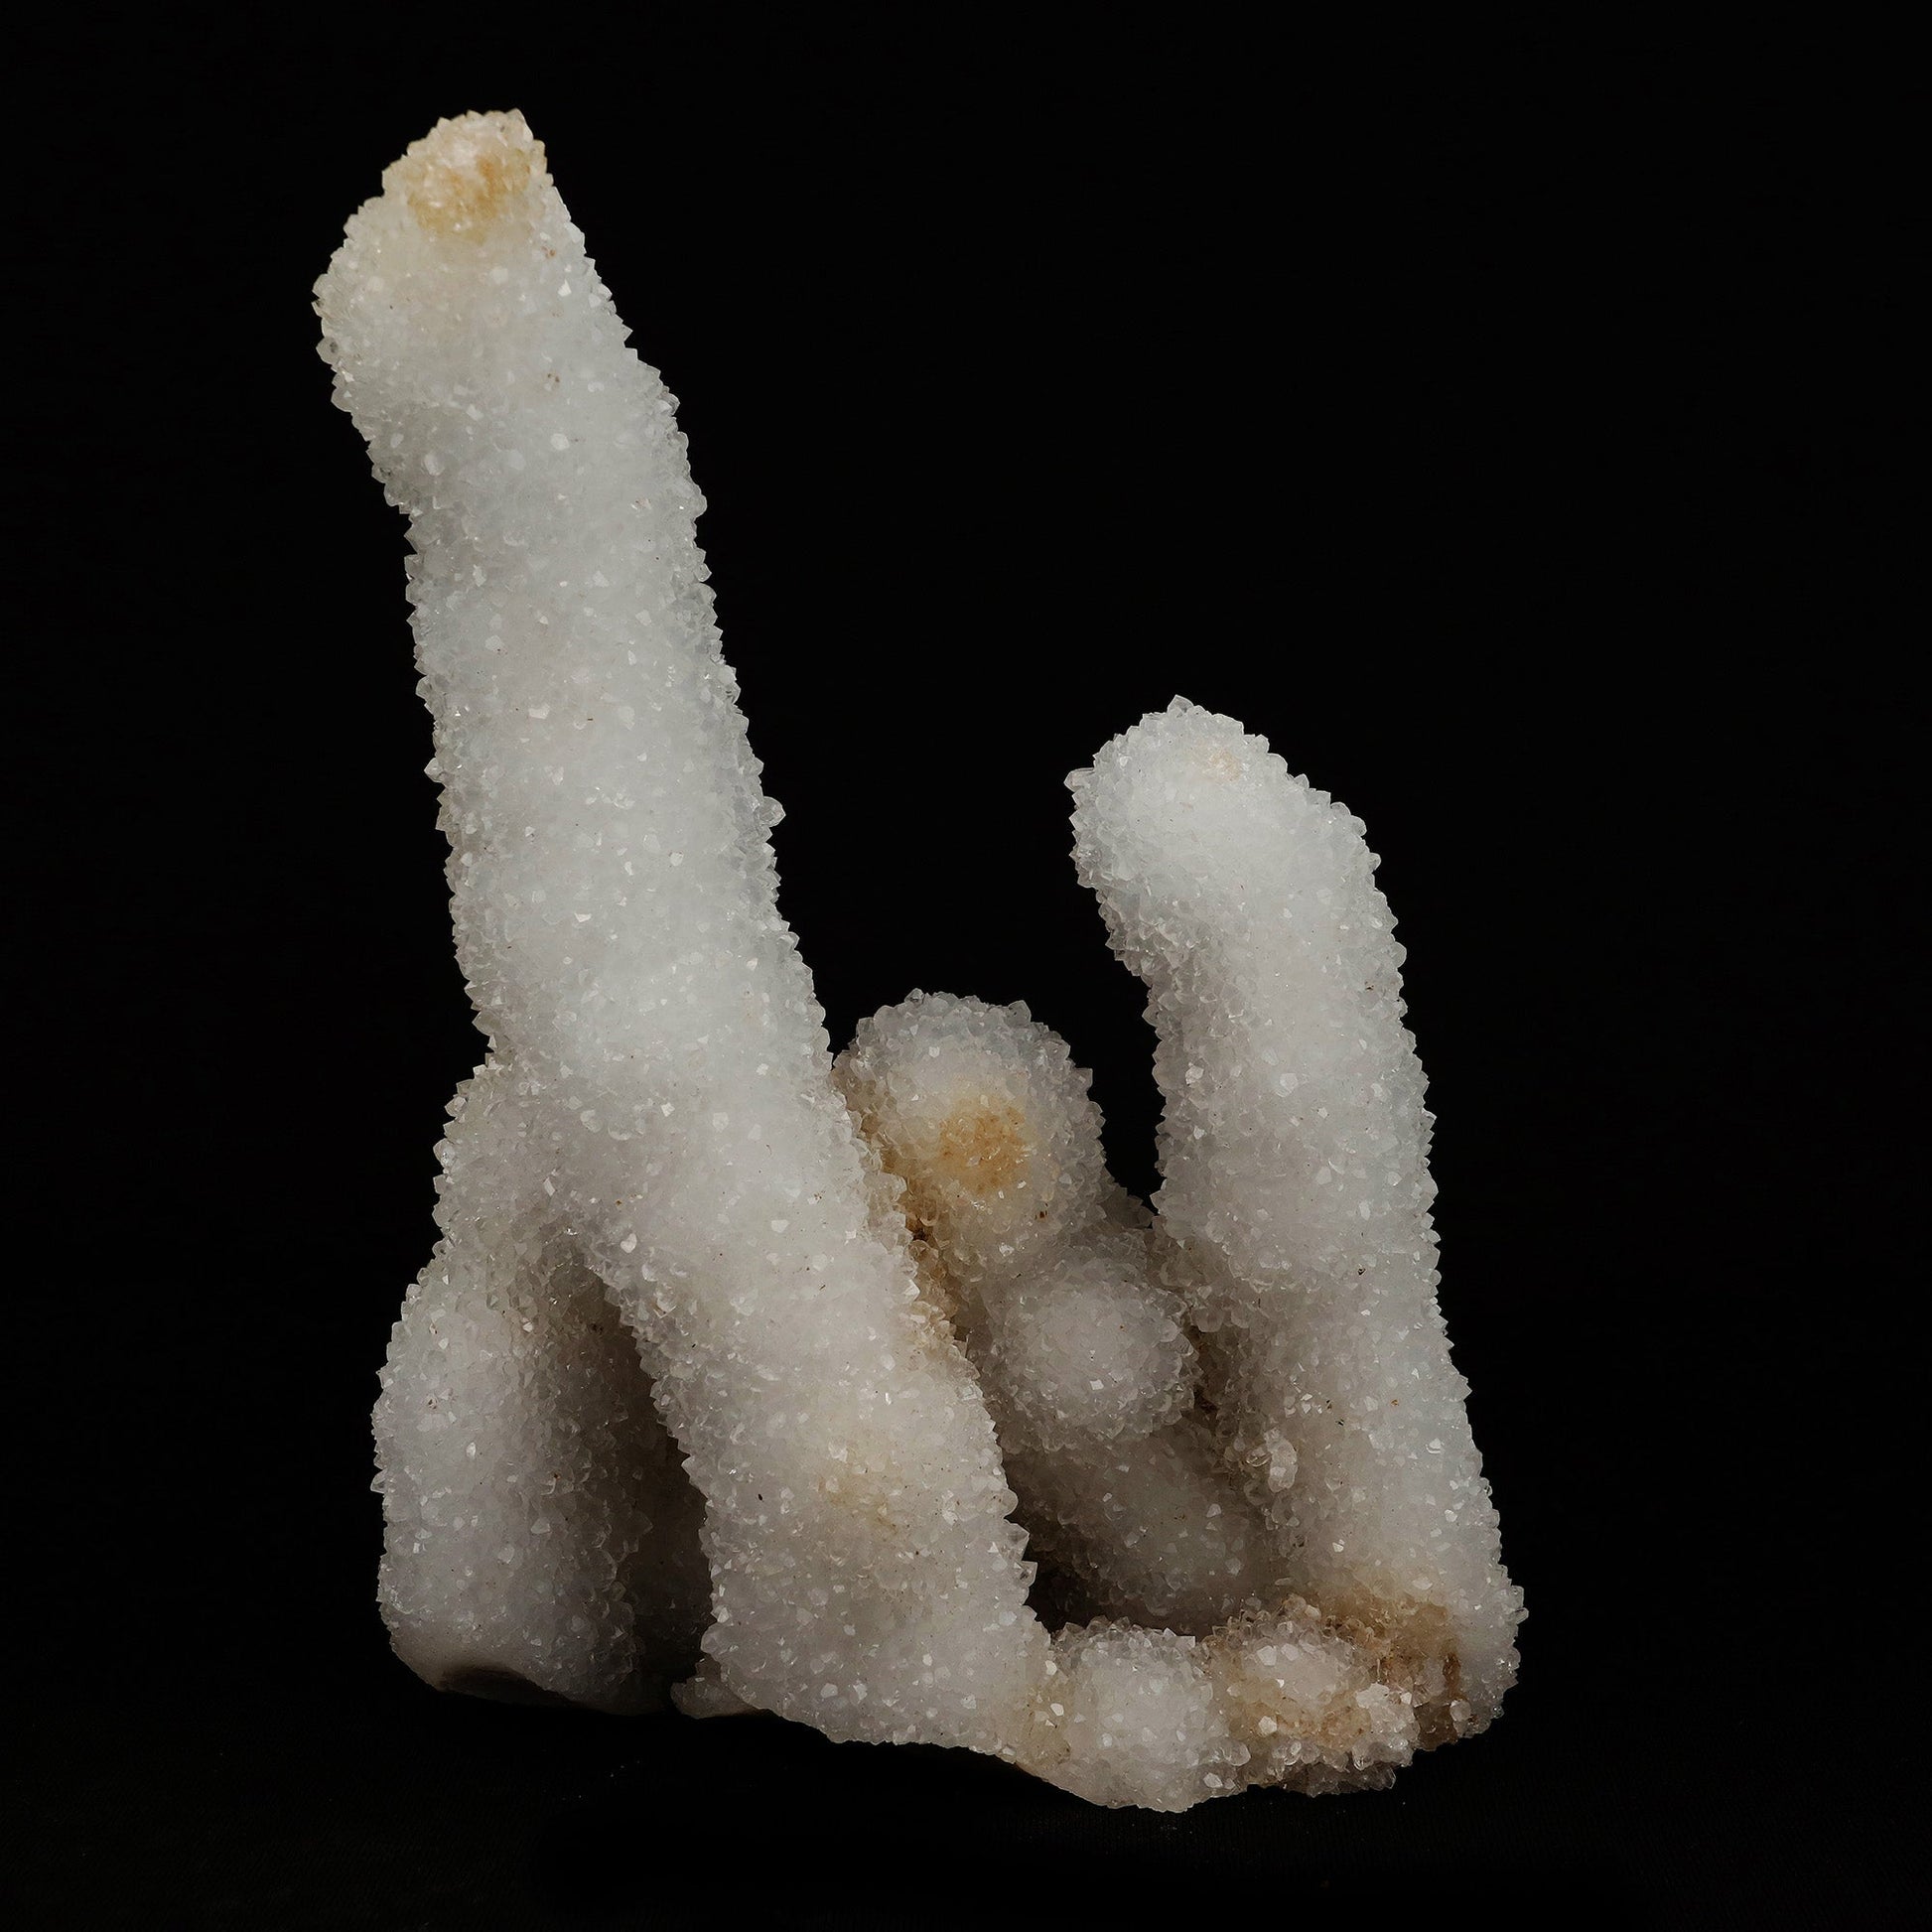 MM Quartz Stalacite Coral Formation Natural Mineral Specimen # B 5203  https://www.superbminerals.us/products/mm-quartz-stalacite-coral-formation-natural-mineral-specimen-b-5203  Features: Scolecite forms in clusters of sharp, prismatic, “needle-like” points, which often radiate outward from a source, or, alternatively, criss-cross with each other to form sculptures that are truly a natural art form. Scolecite is mainly found in India, although there are also deposits of white scolecite 